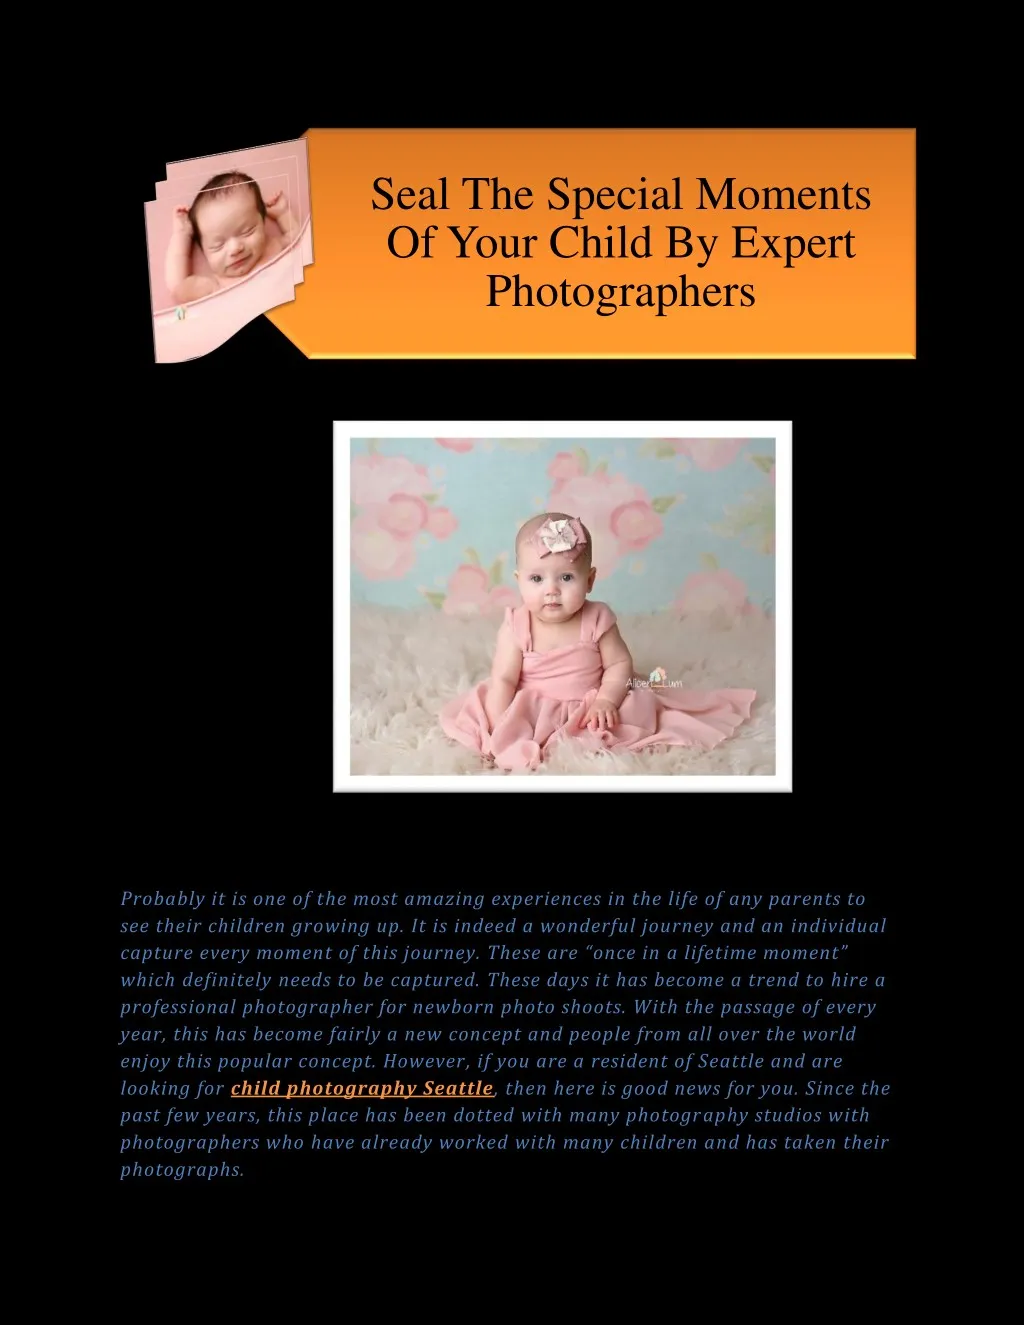 seal the special moments of your child by expert